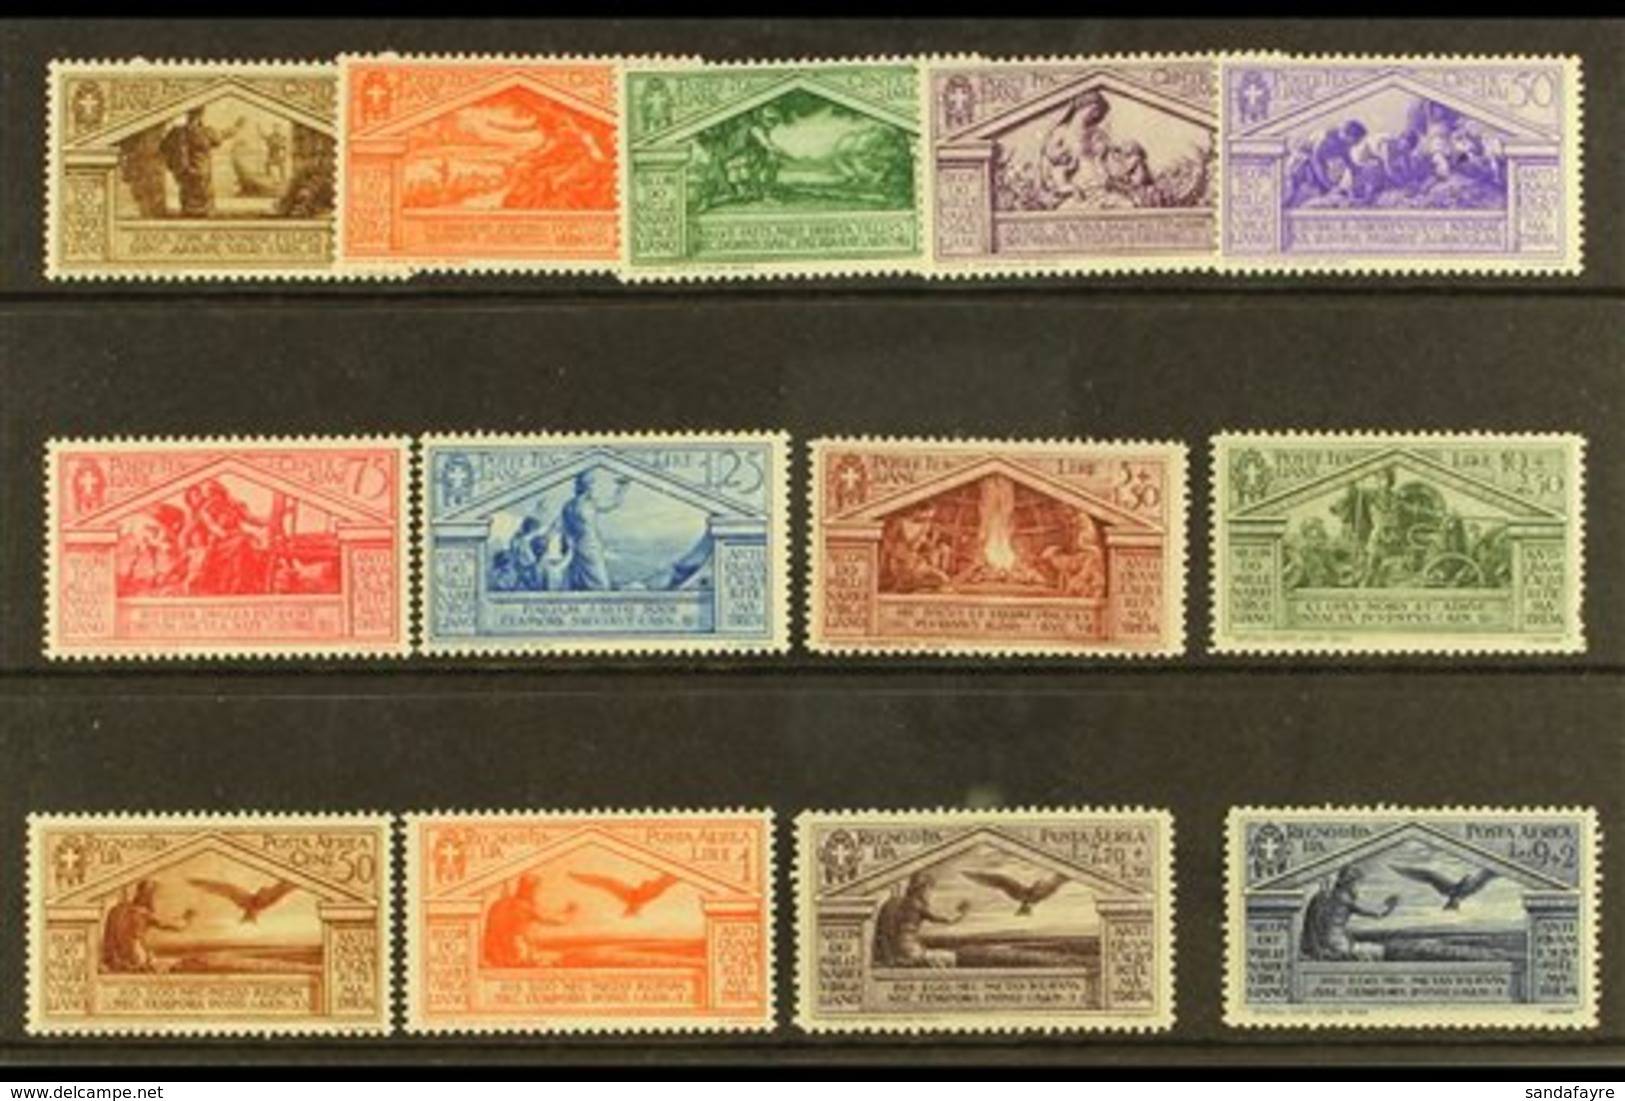 1930 Virgil  Postage And Air Sets Complete, Sass S. 58, Fresh Mint, The 10L Postage With Perf Fault, All Others Very Fin - Unclassified